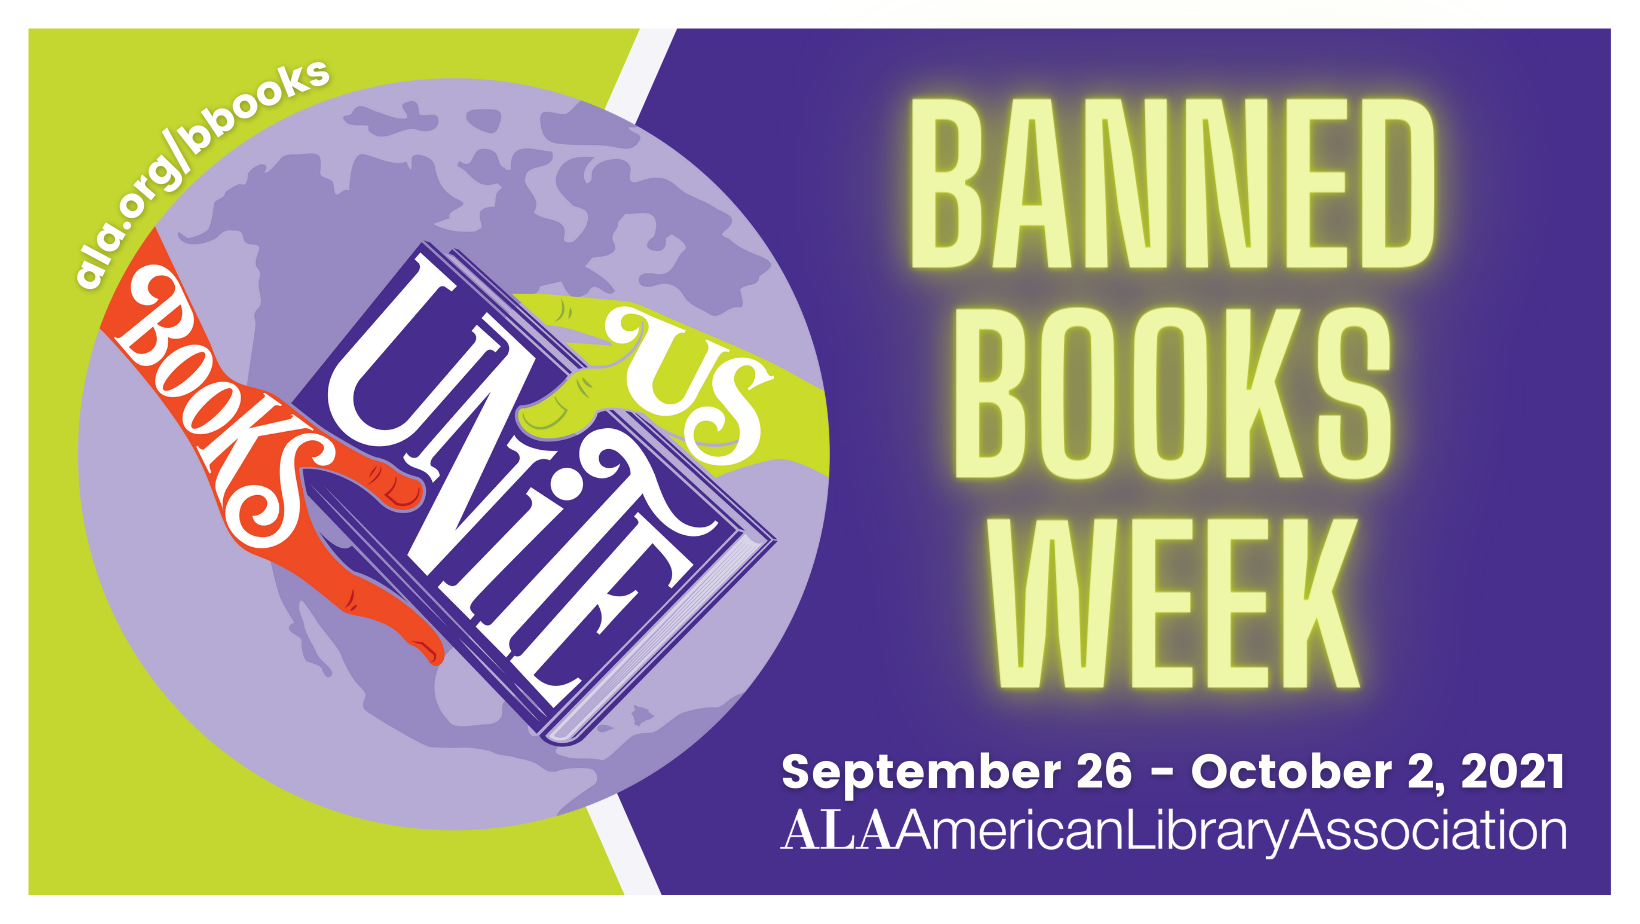 Banned books week logo, and dates of September 26-October 2, 2021